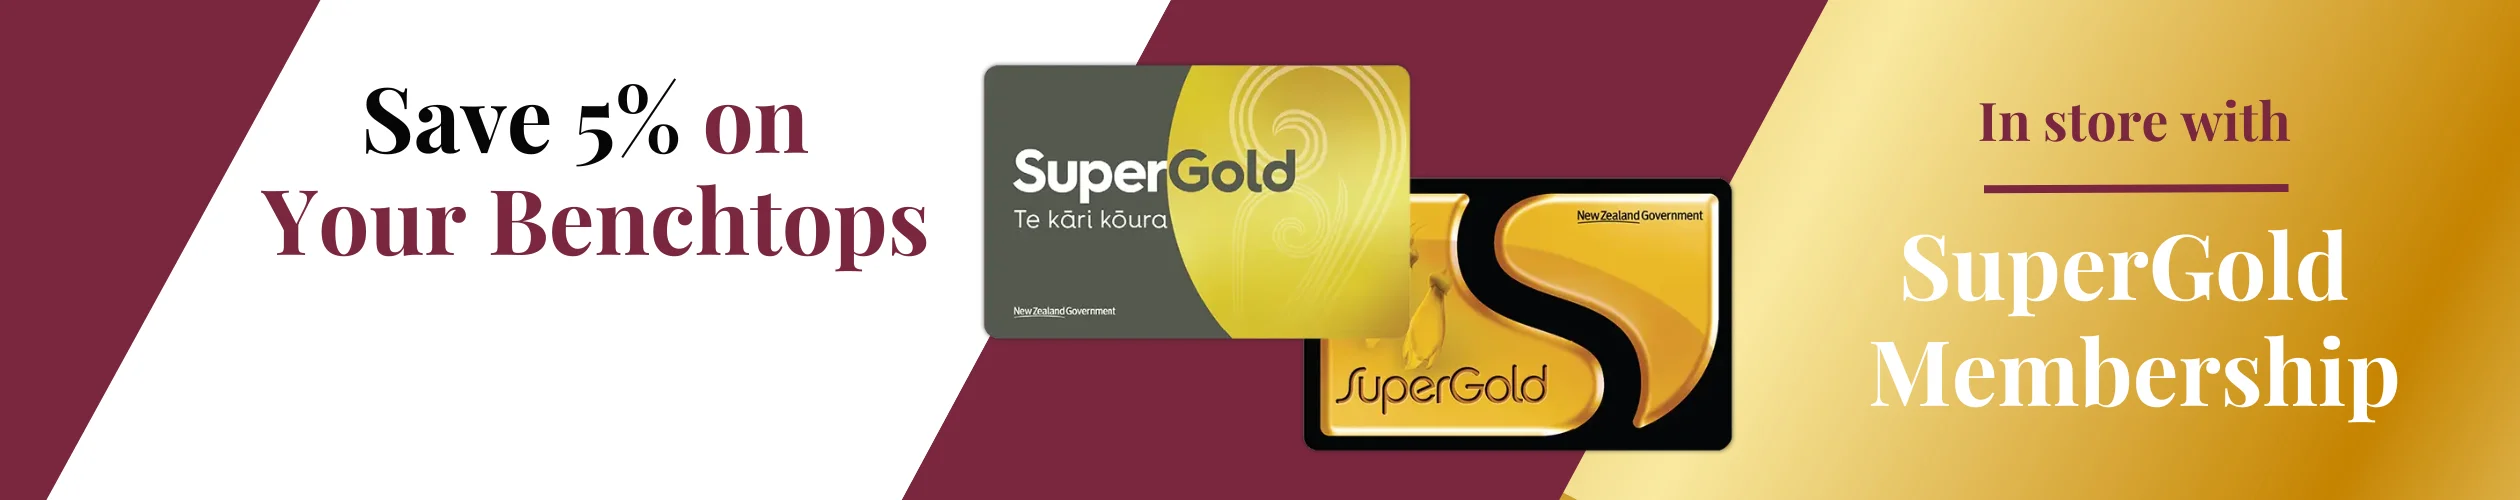 Save 5% on Your Benchtops - SuperGold Membership Offer